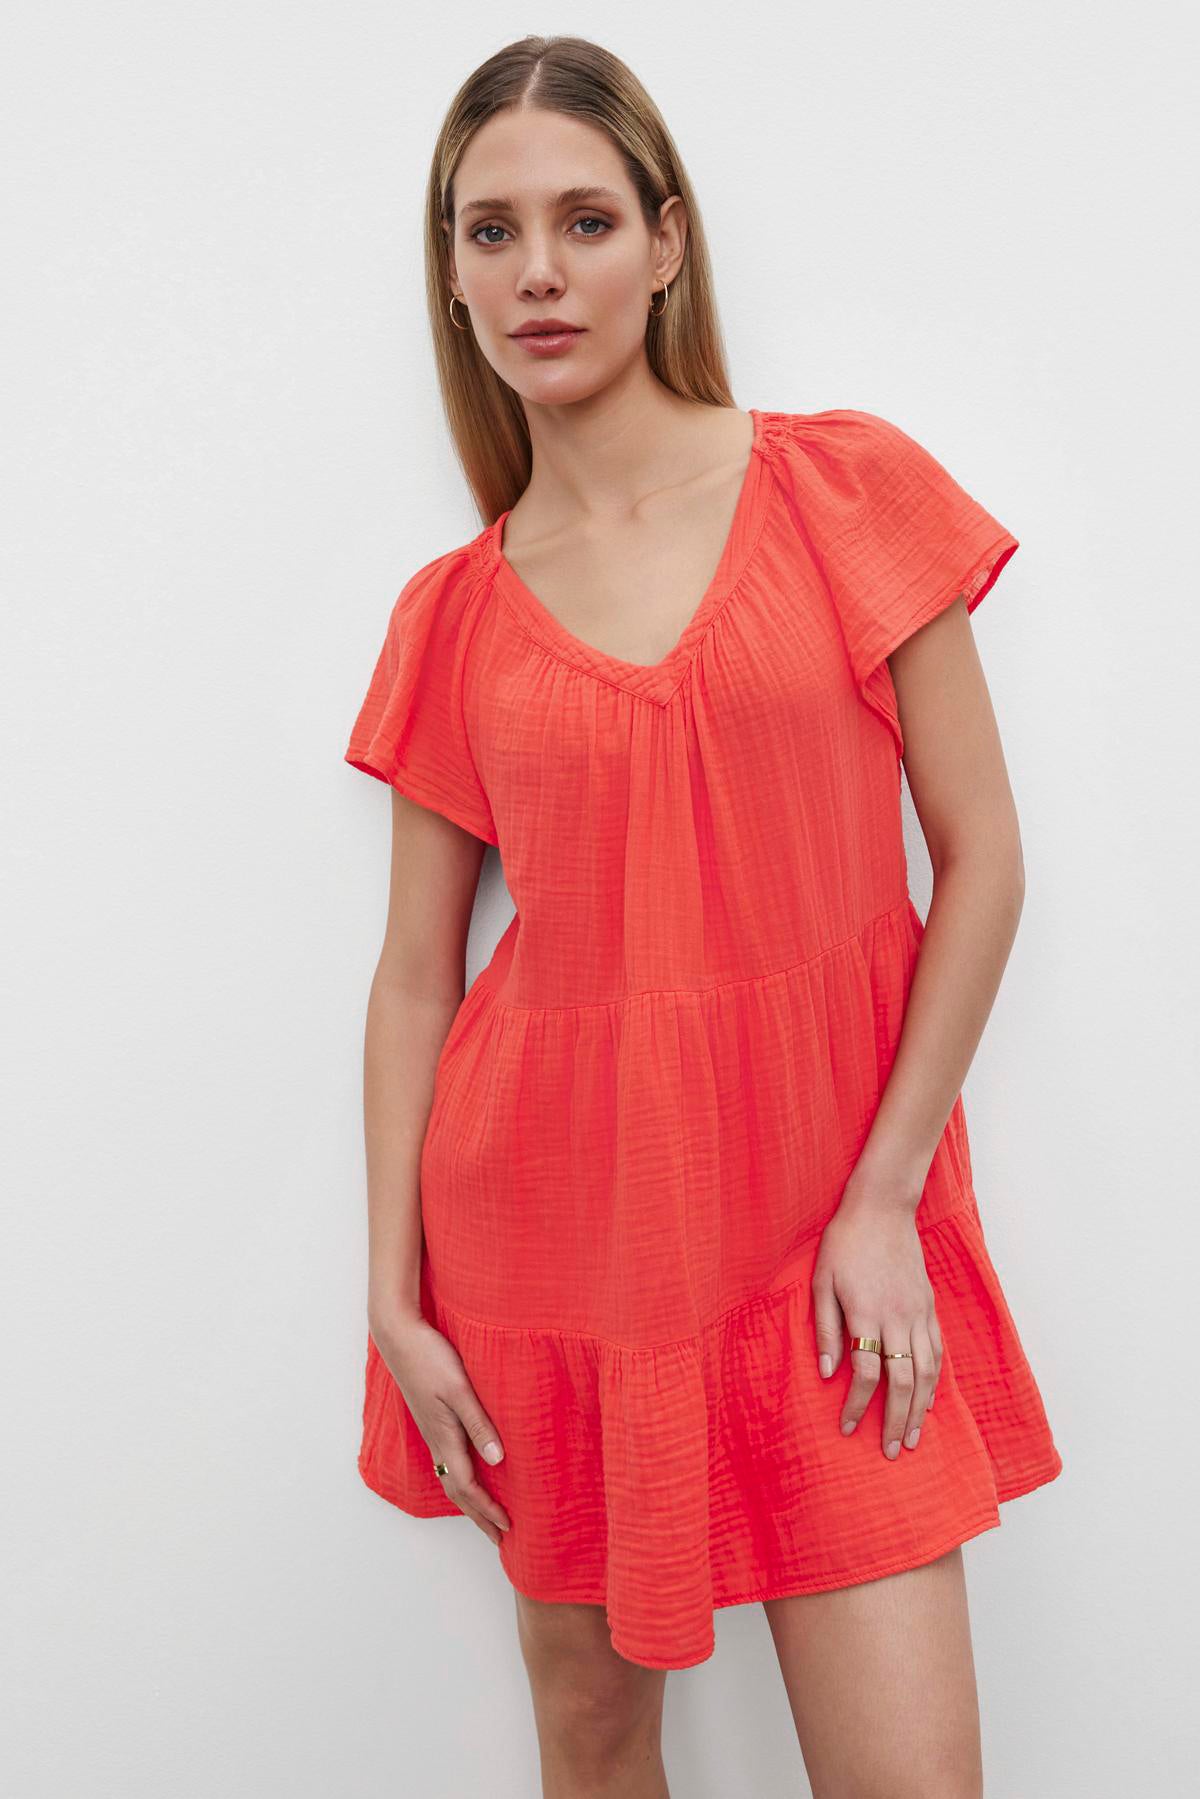 A woman in a bright orange, short ruffled Eleanor Cotton Gauze Tiered Dress by Velvet by Graham & Spencer standing against a white background, looking directly at the camera.-36532828569793